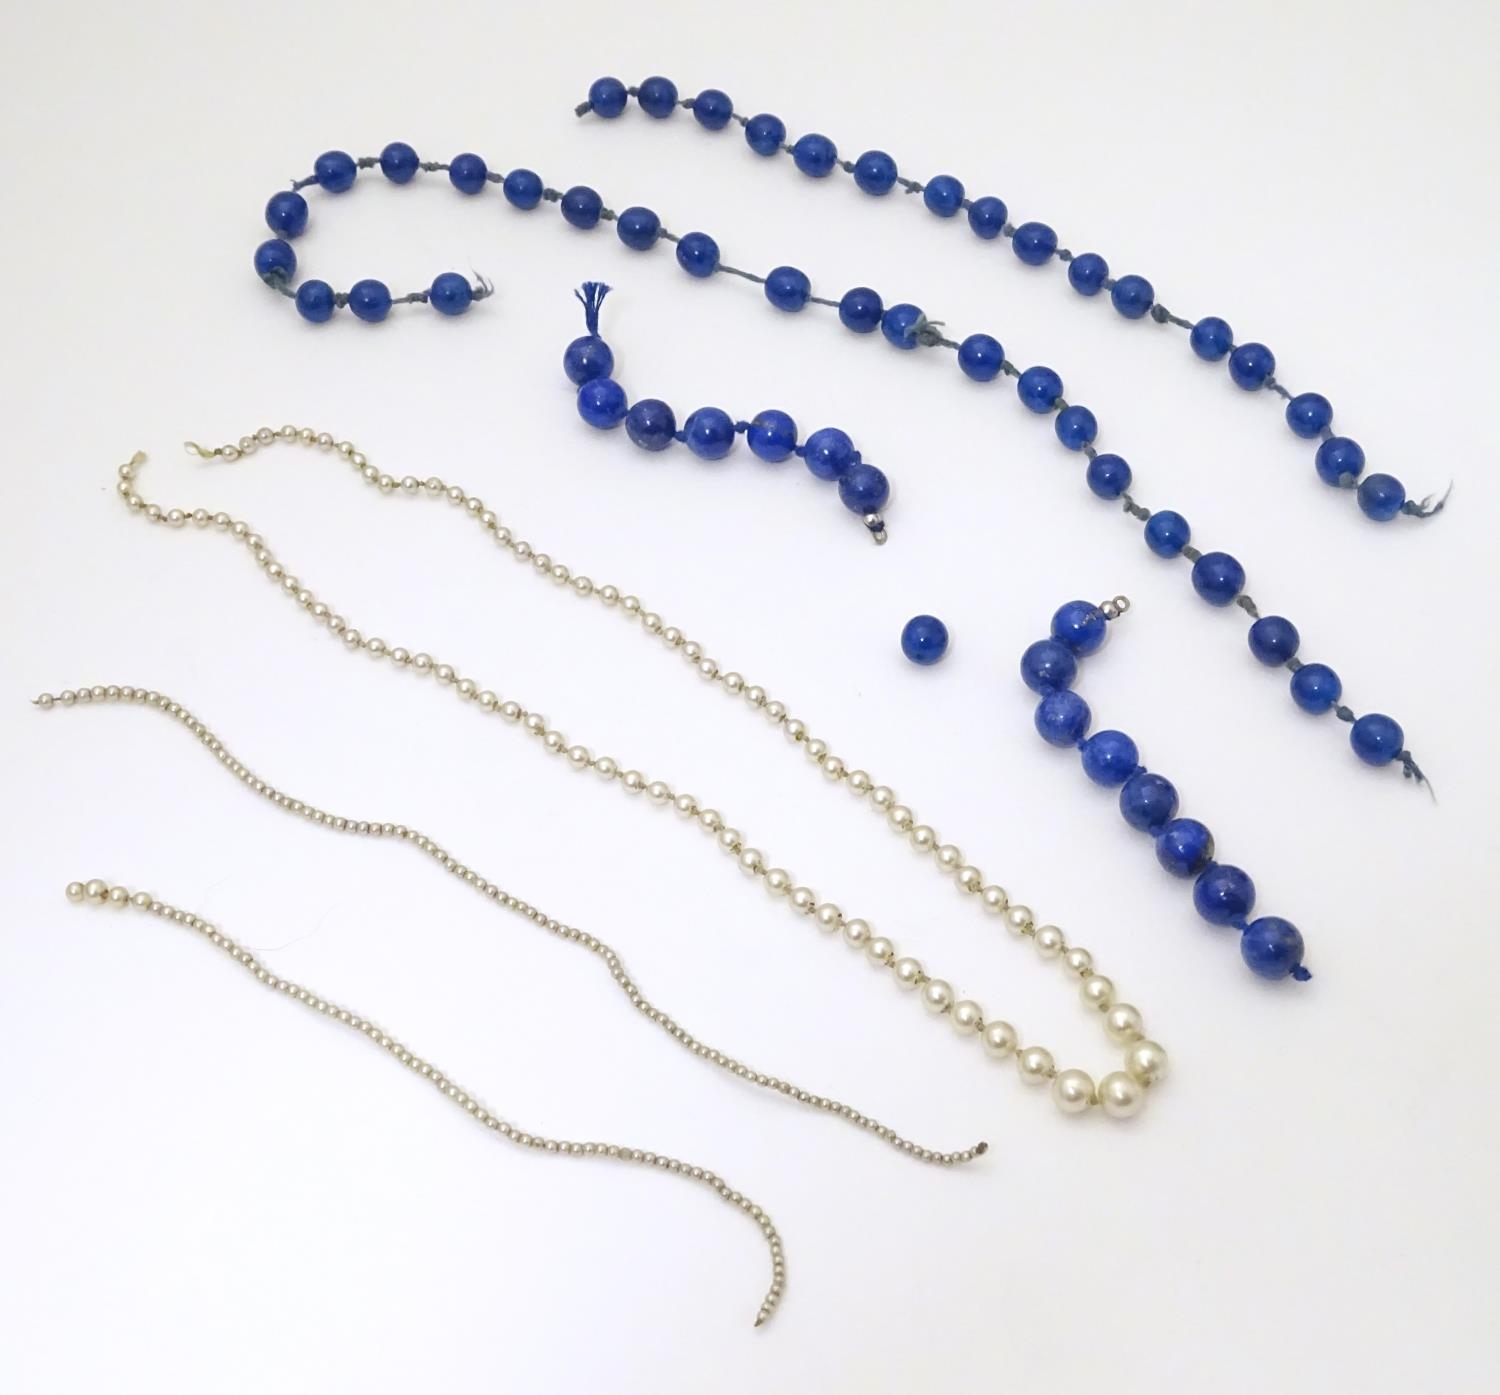 A quantity of lapis lazuli beads etc. Please Note - we do not make reference to the condition of